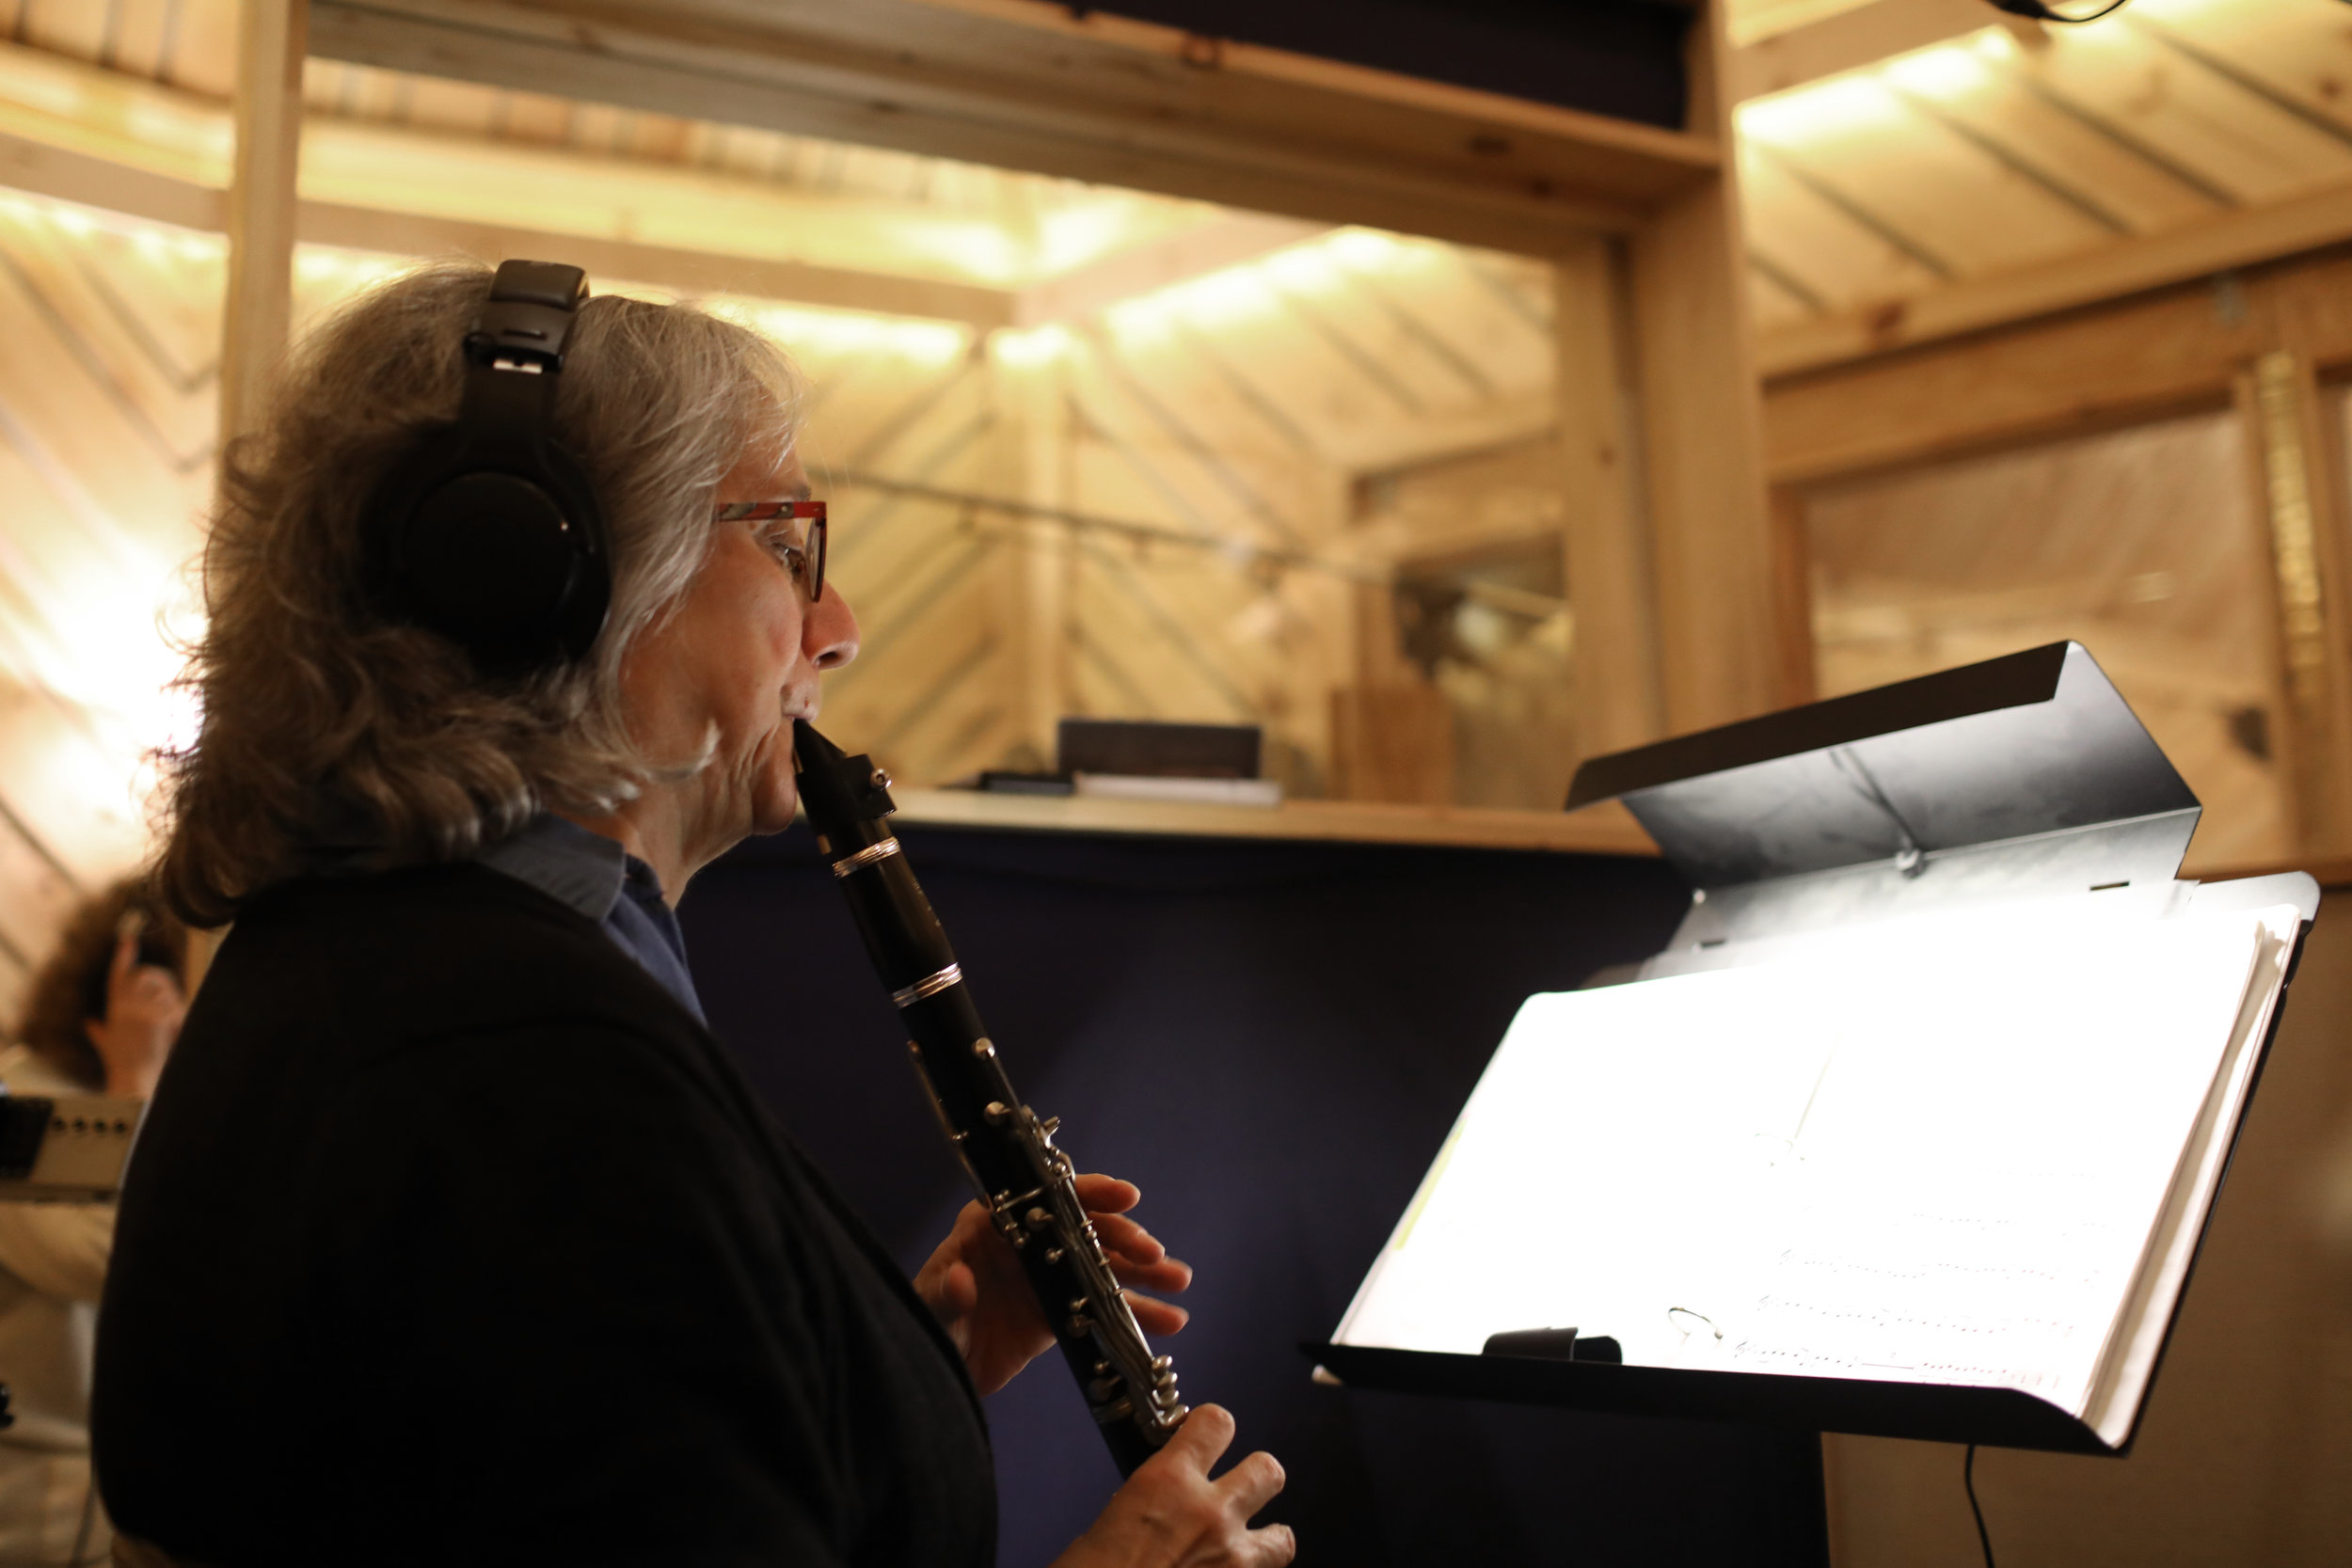 Laurie playing recording.jpg